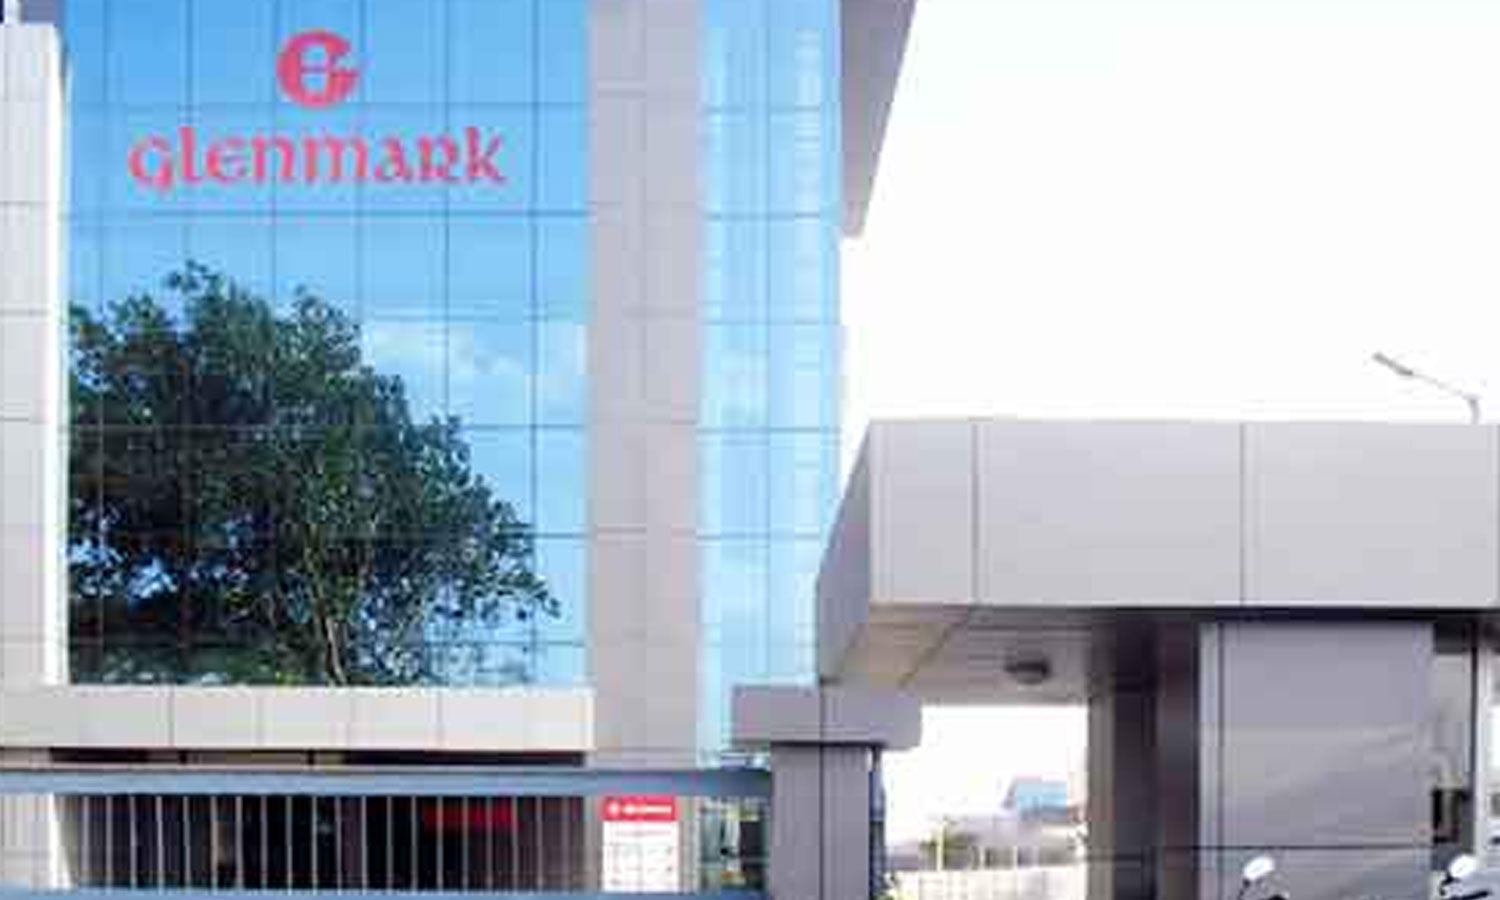 Glenmark pledges support for 10,000 meals for daily wage earners